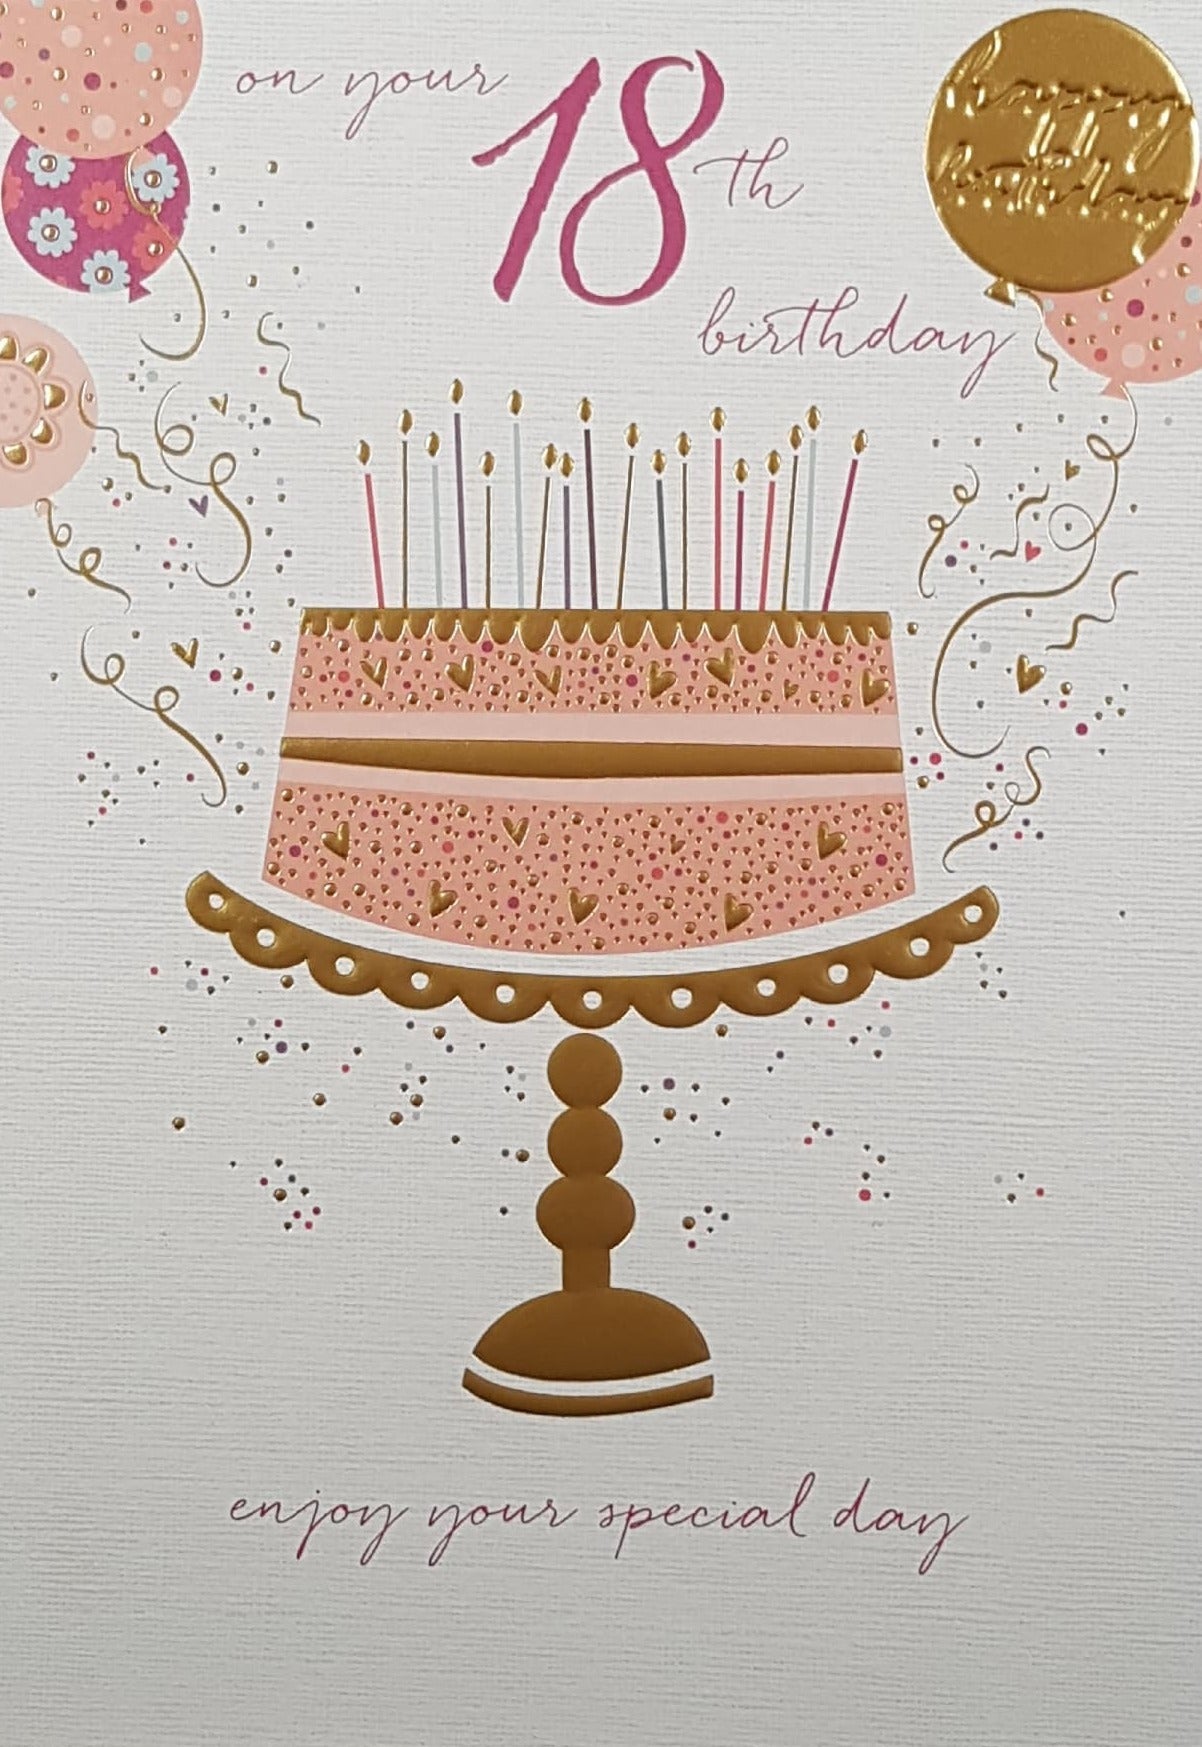 Age 18 Birthday Card - Pink Cake on Shiny Gold Cake Stand